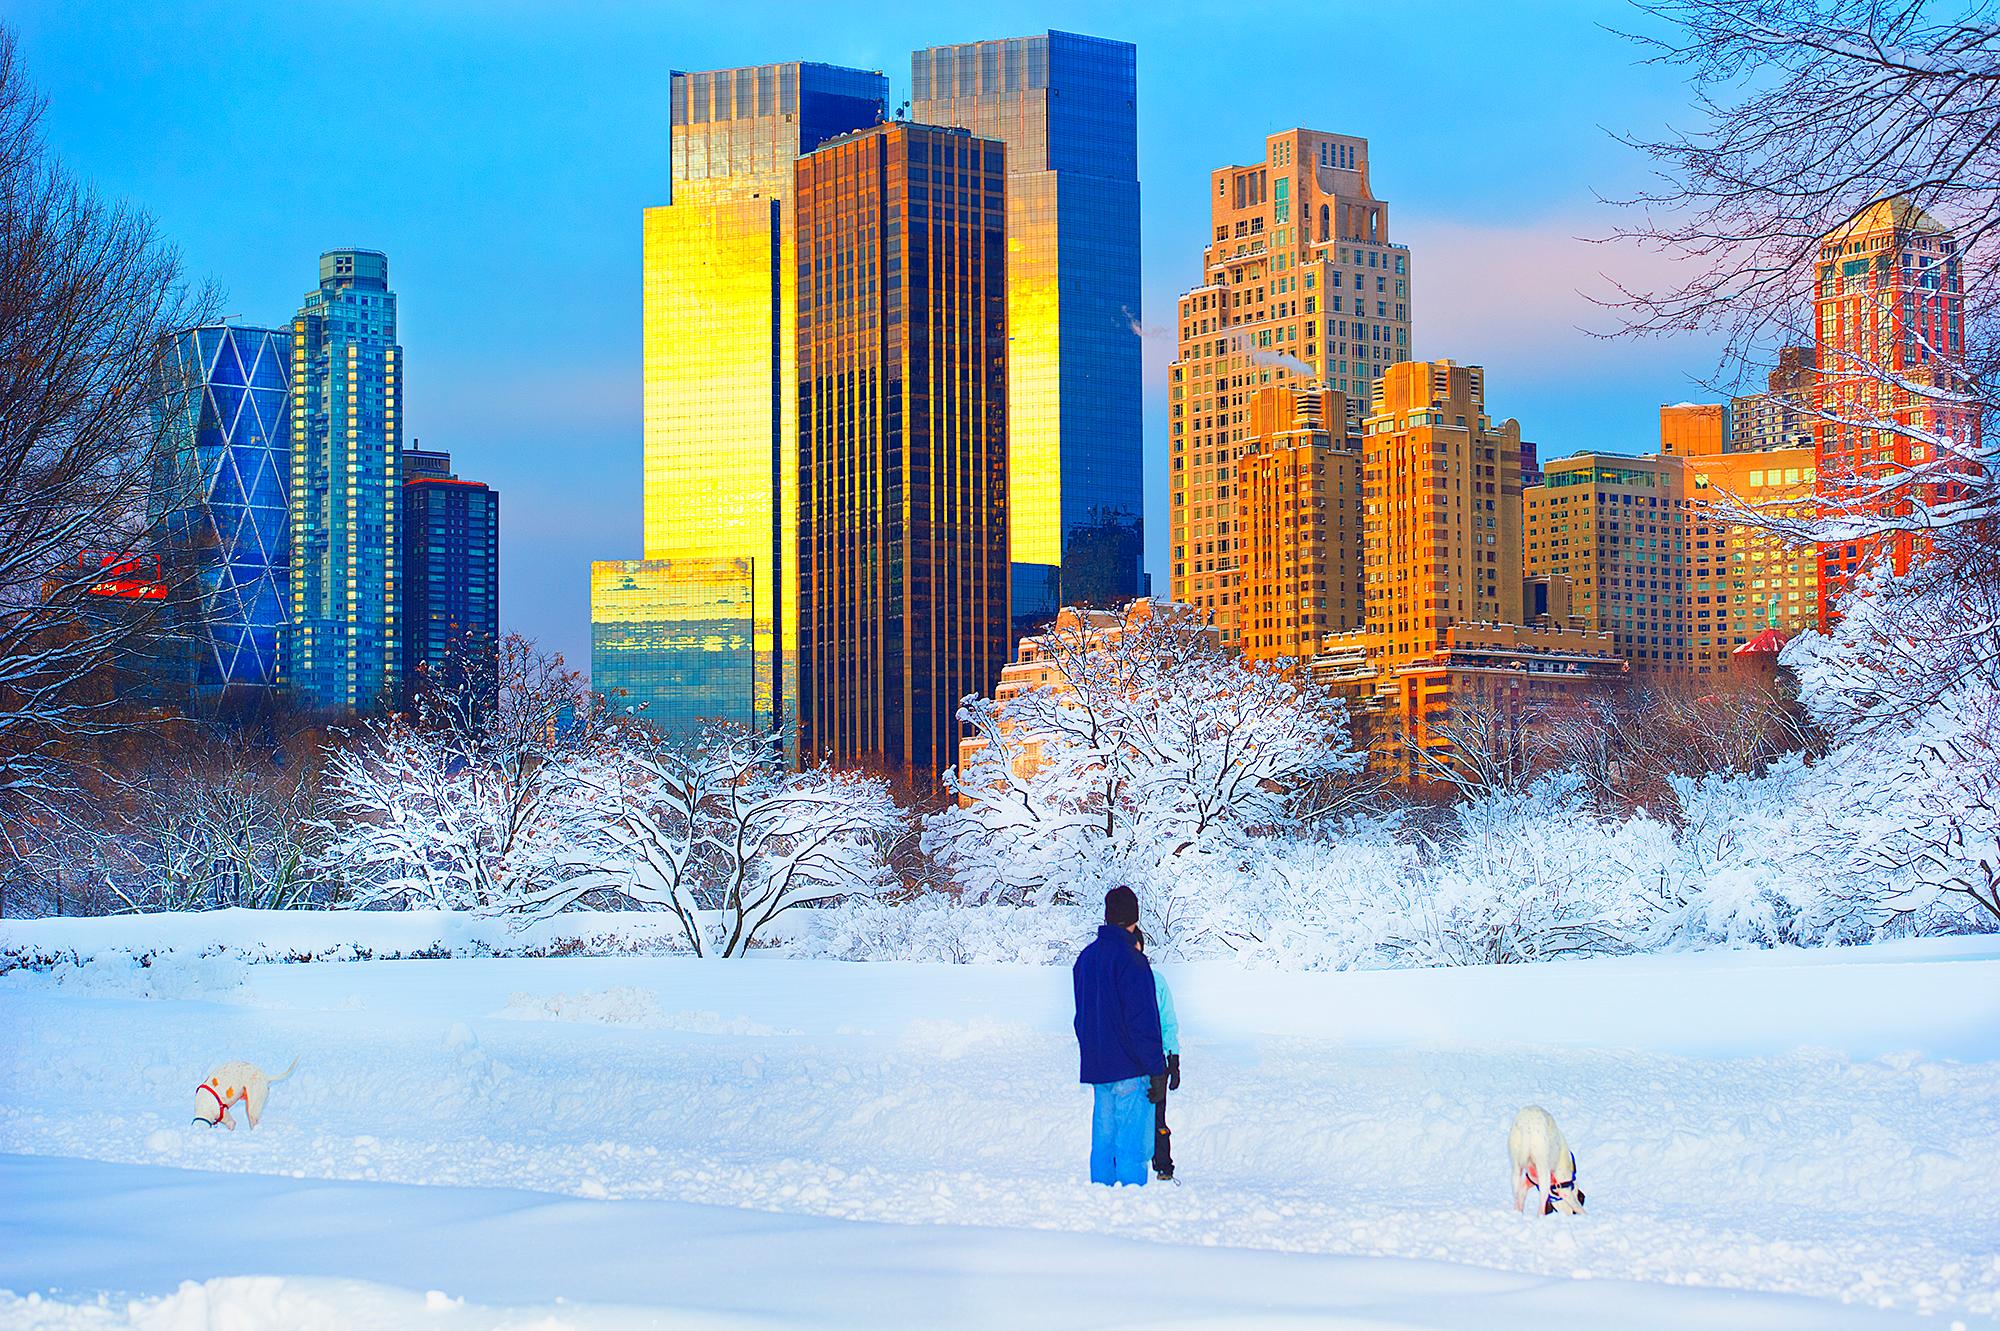 Snowfall in Central Park with Dogs in Snow, Architecture 